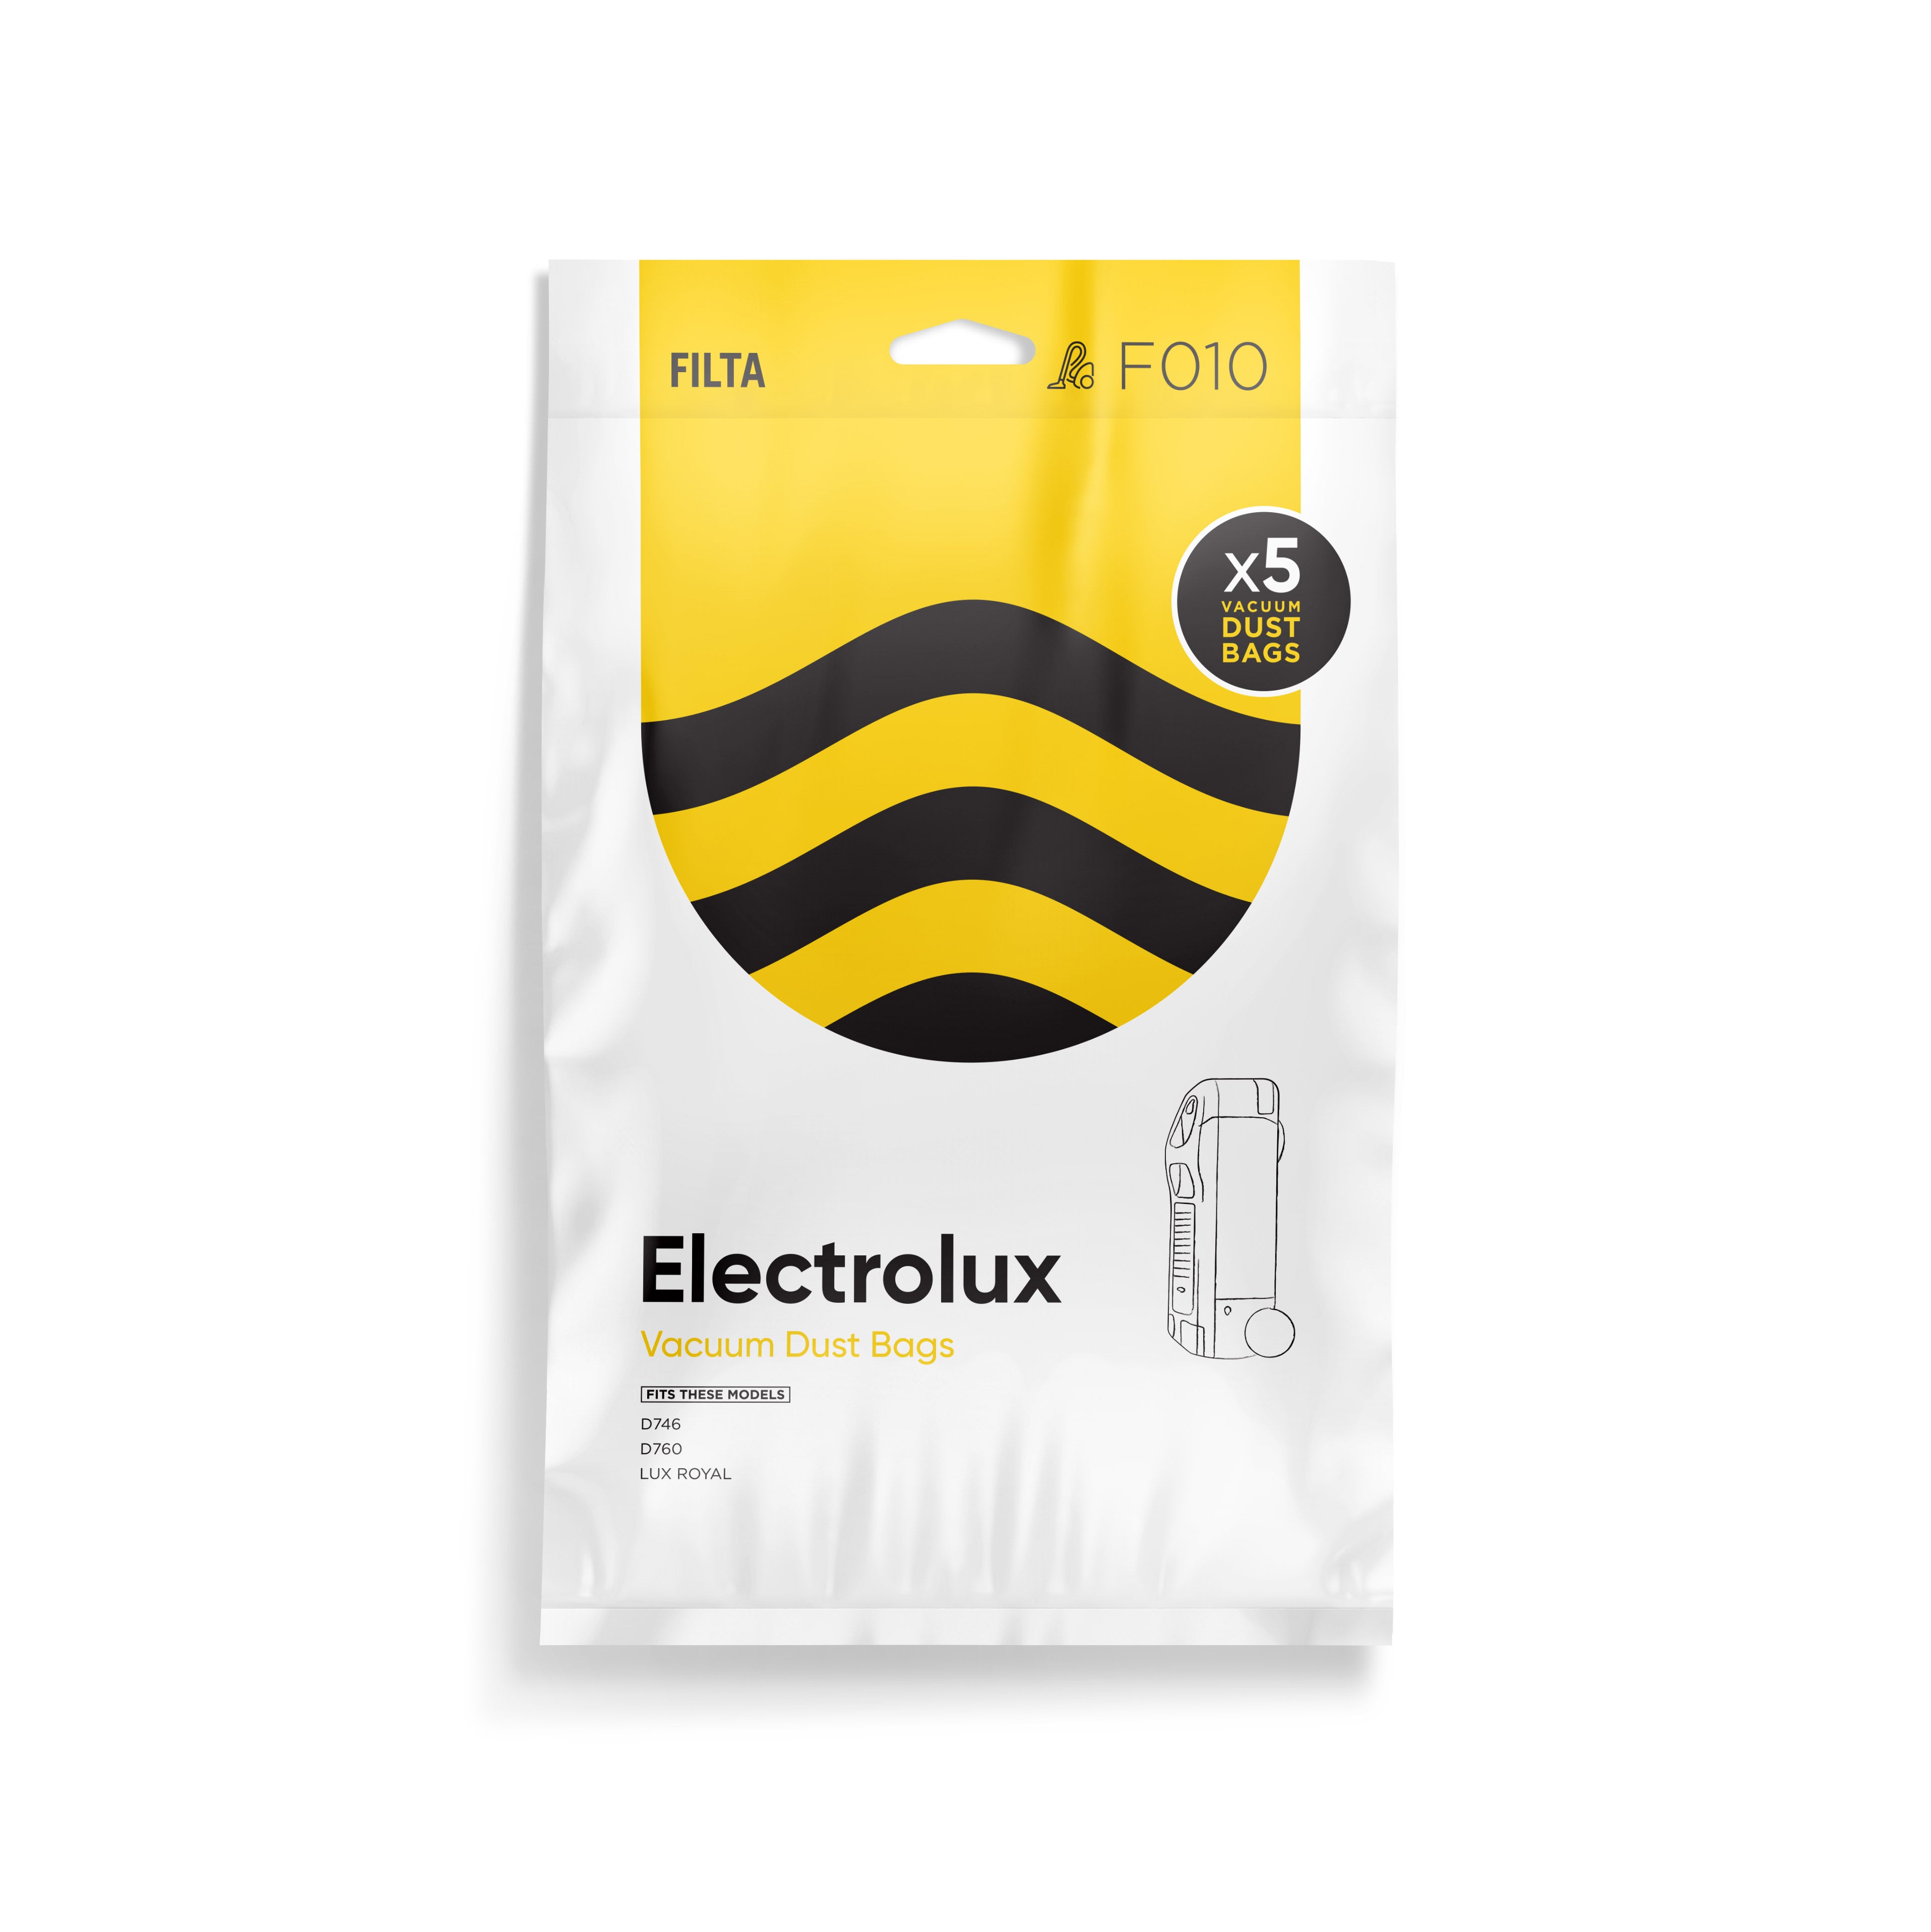 FILTA ELECTROLUX D746 PAPER VACUUM CLEANER BAGS 5 PACK (F010)